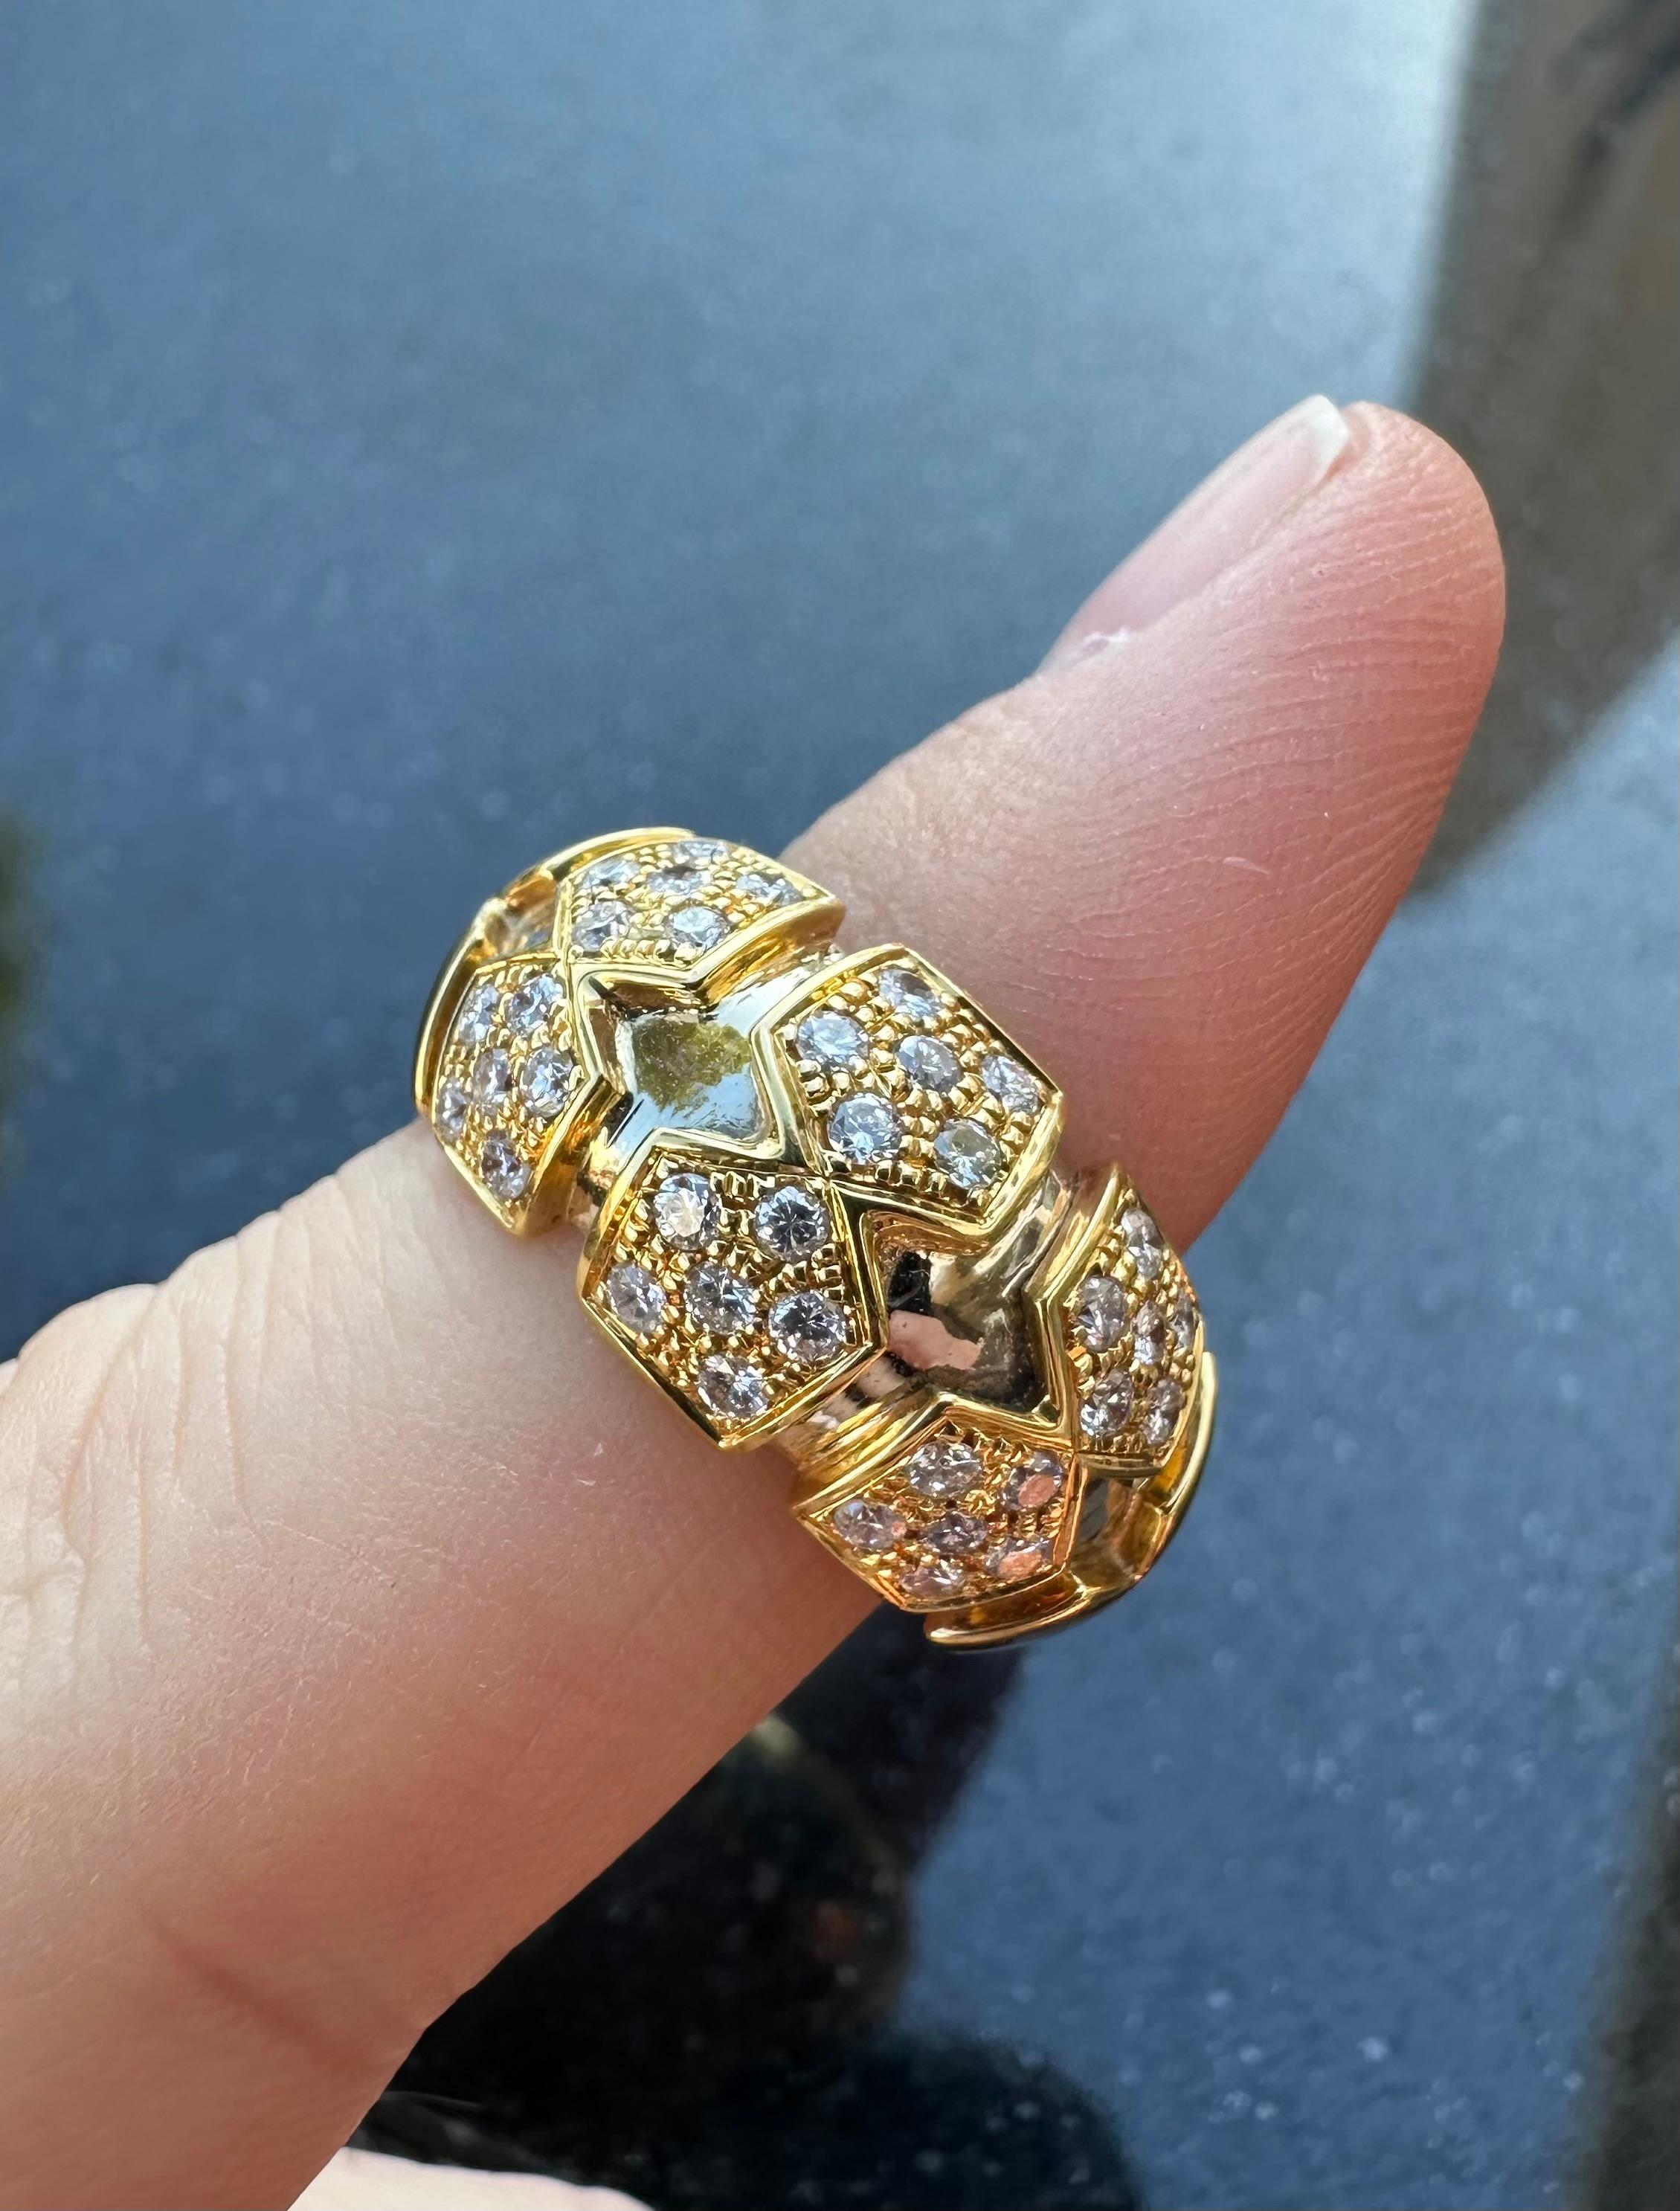 Yellow Gold Cocktail Ring set with 36 White Diamonds weighing 0,59 ct.
Weight in 19.2K Gold: 9.4 g.
Handmade in Portugal.
Stamped by the portuguese assay office as 19.2K Gold.
Stamped with Rosior hallmark.
Loyal to artisanal techniques, Rosior